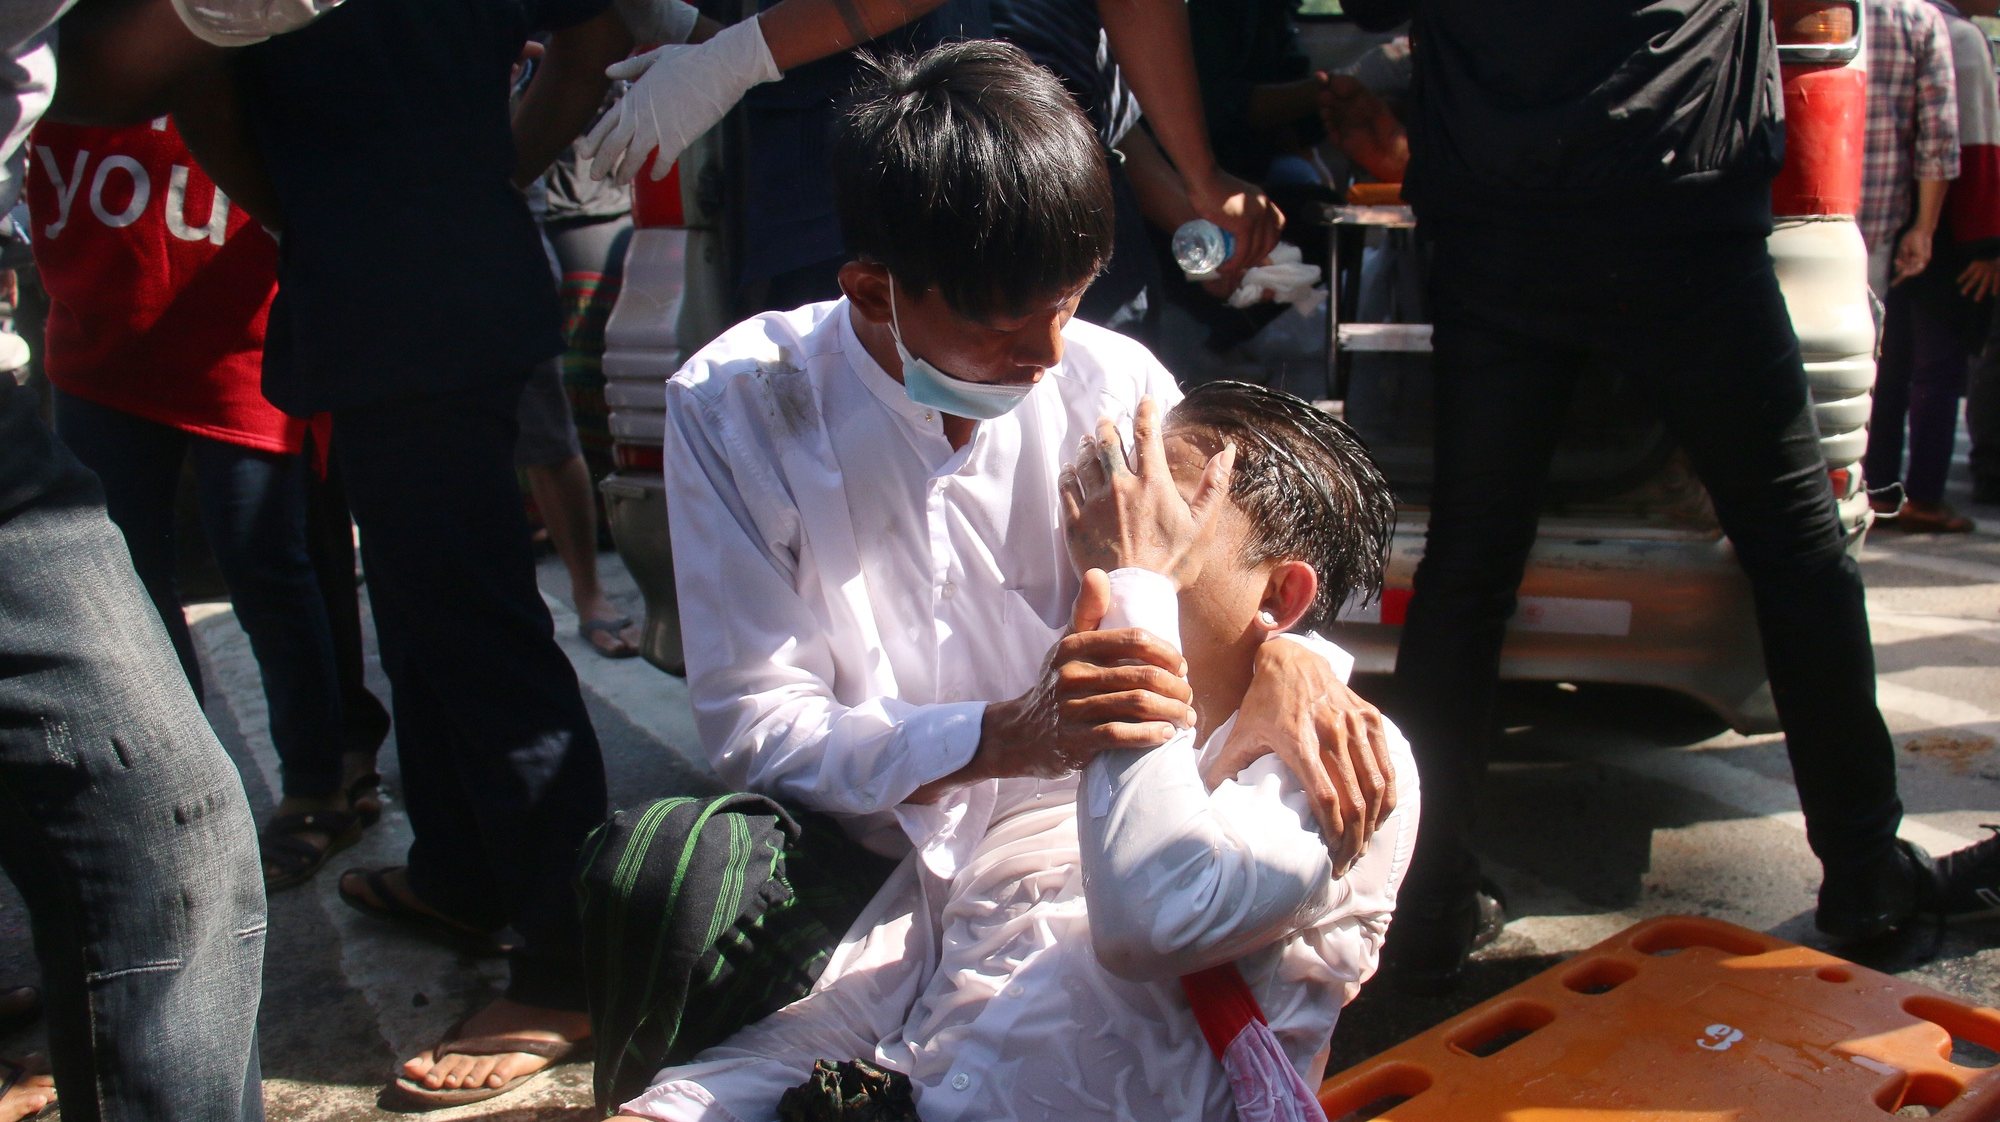 epa08997971 A man helps a demonstrator injured by police water cannons during a protest against the military coup, in Naypyitaw, Myanmar, 09 February 2021. Thousands of people continued to rally despite stern warnings from the military after days of mass protests. Orders were issued on 08 February in major cities and townships banning people from protesting or gathering in groups of more than five. A nighttime curfew was also imposed. Myanmar&#039;s military seized power and declared a state of emergency for one year after arresting State Counselor Aung San Suu Kyi, the country&#039;s president and other political figures in an early morning raid on 01 February.  EPA/MAUNG LONLAN